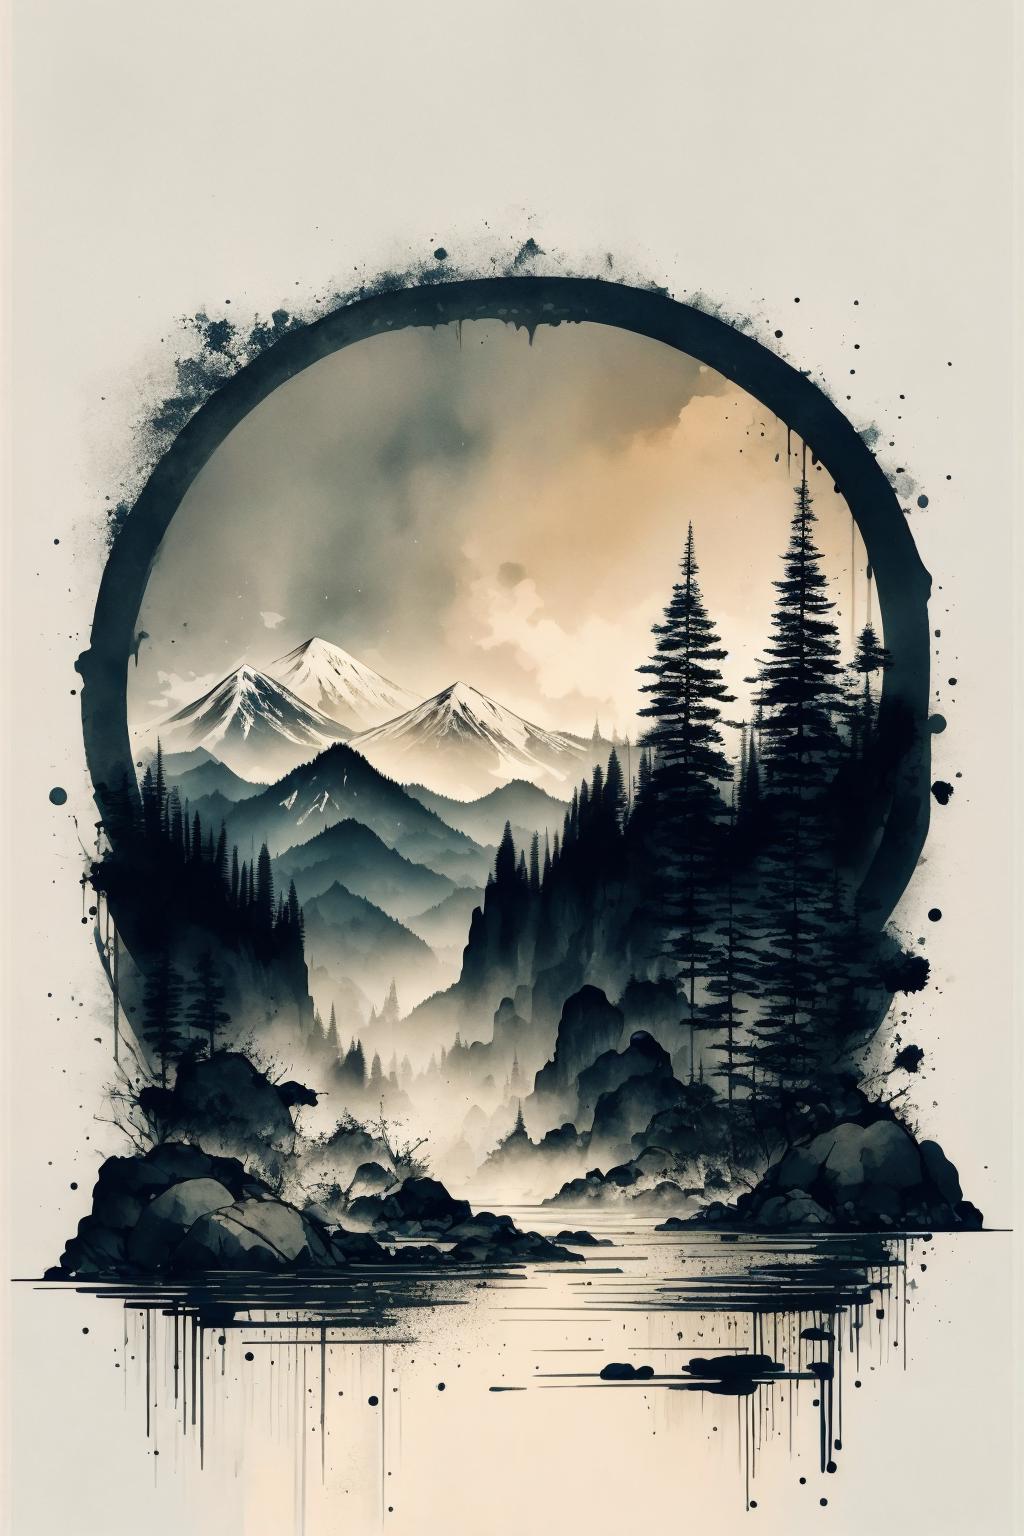 Black and white painting of a forest with mountains in the background and a circle in the foreground.